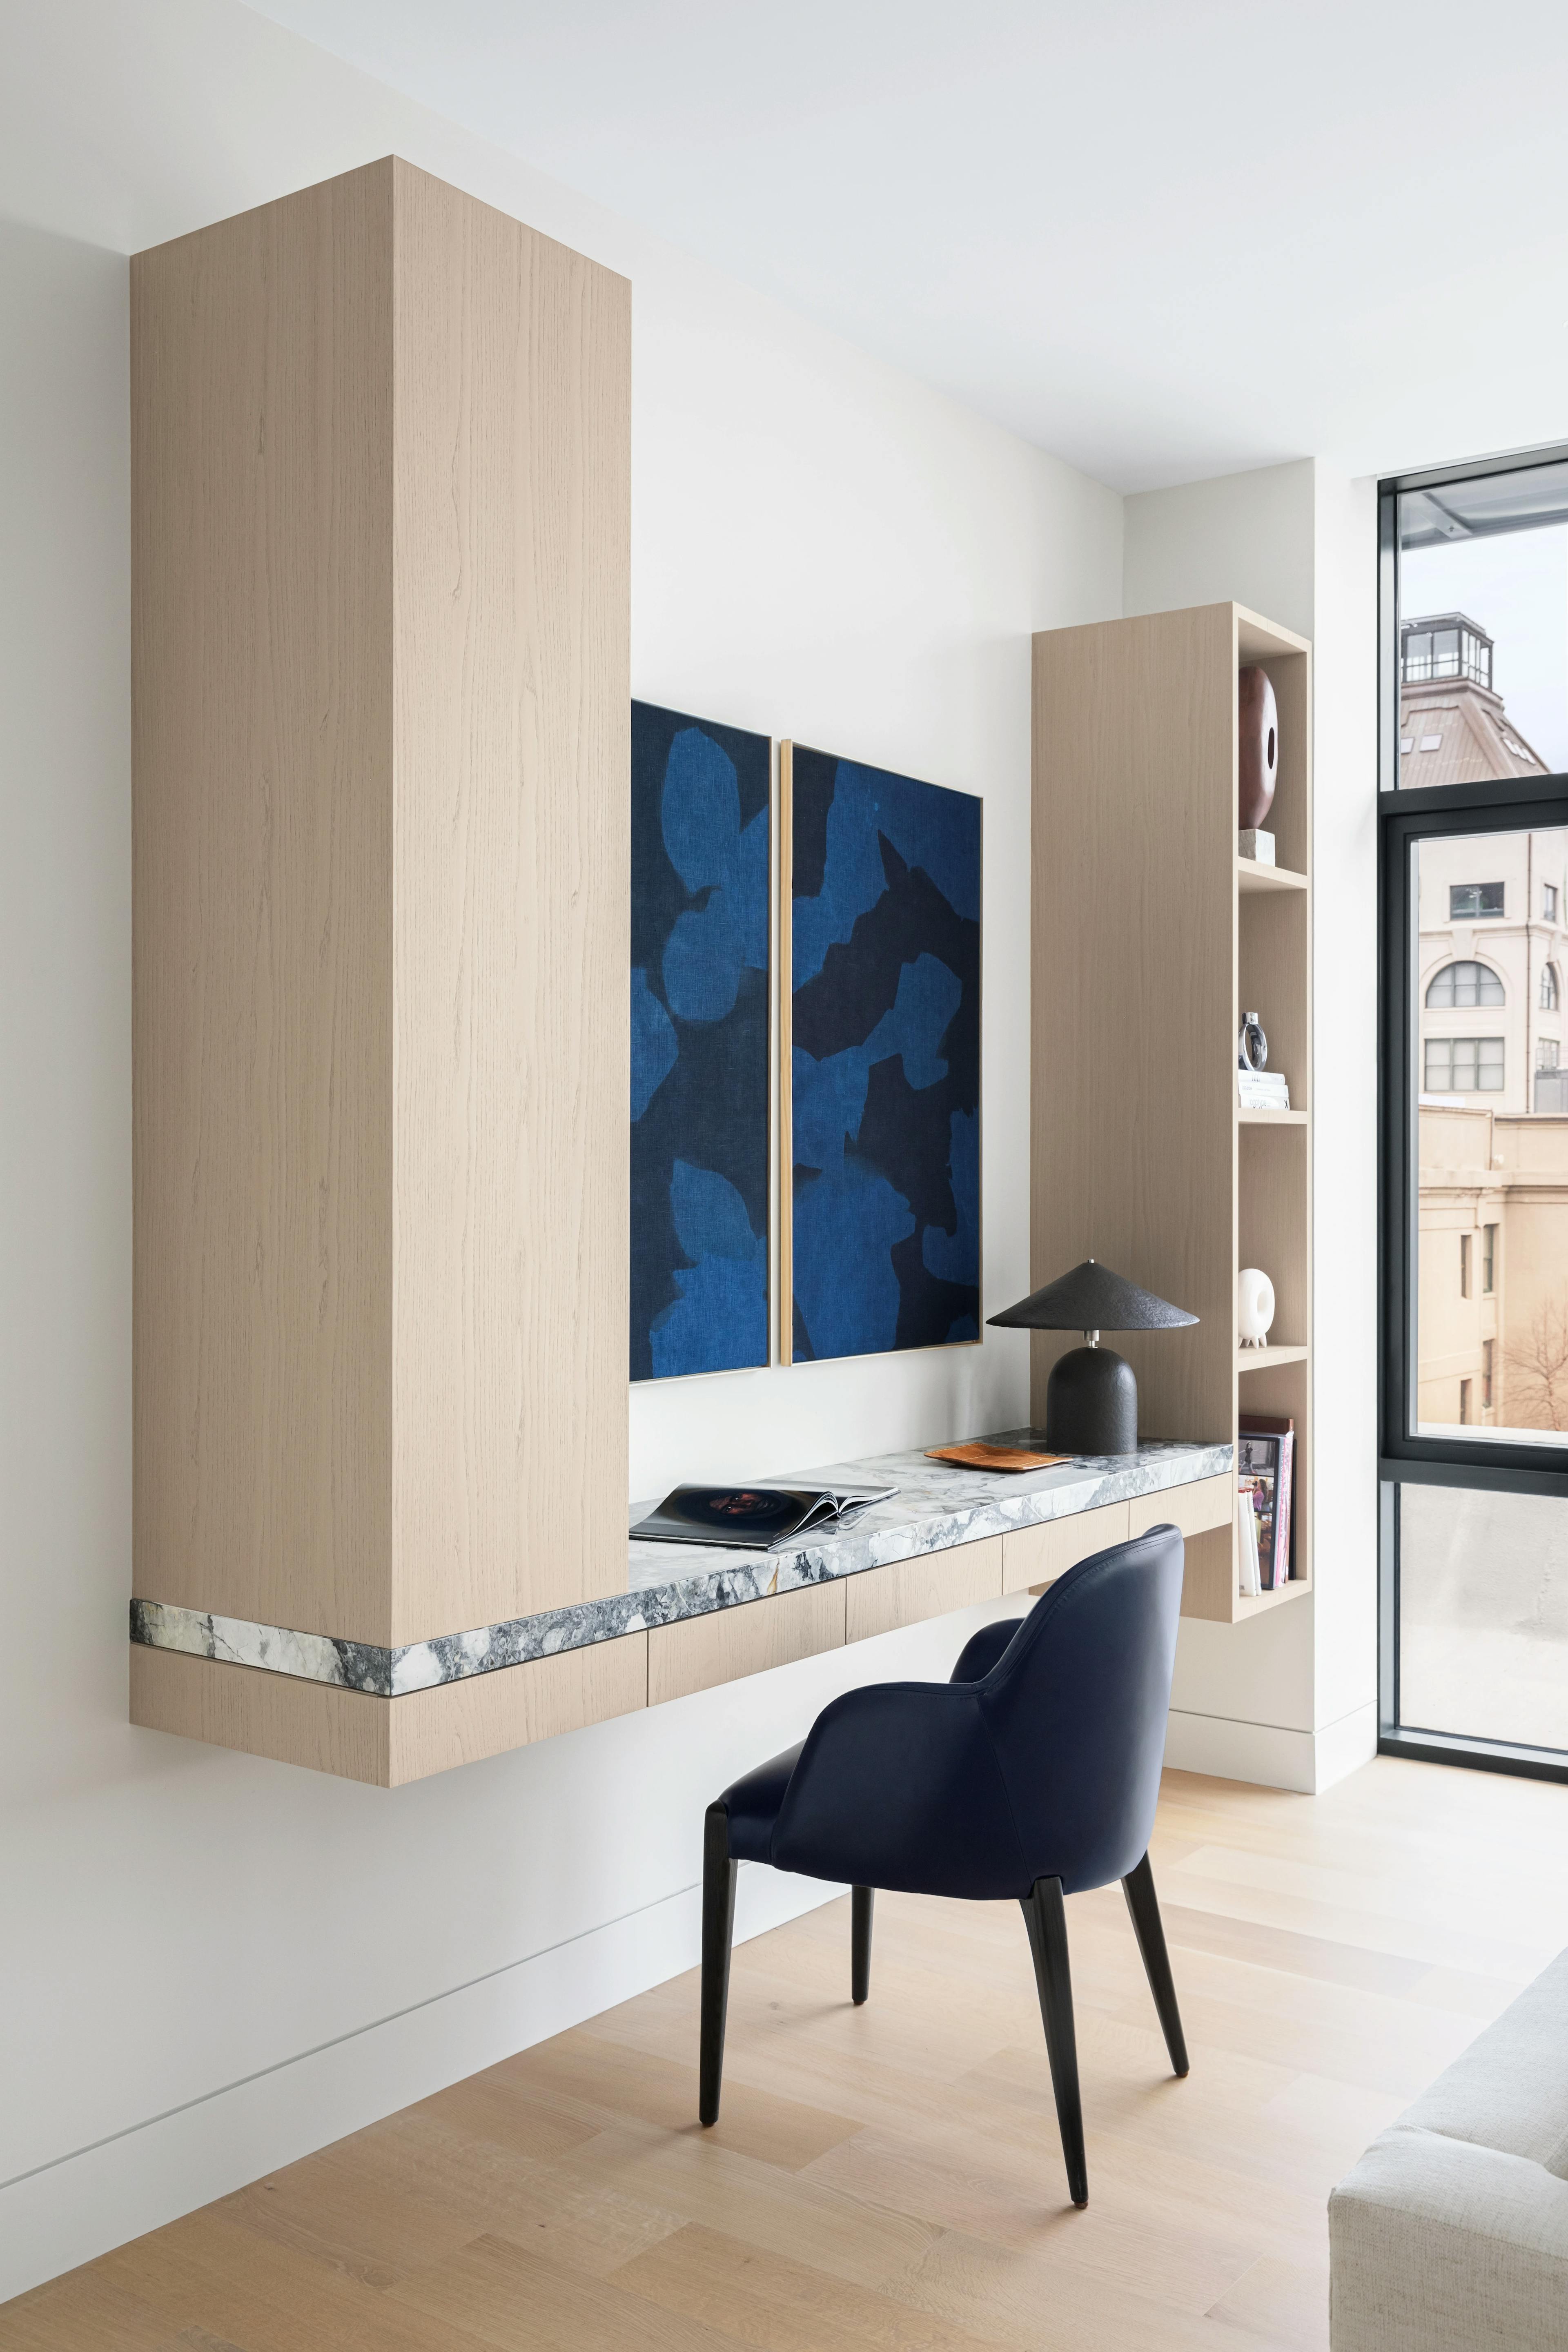 Blue and black diptych by artist Carrie Crawford installed over a beige floating desk in a modern living room.